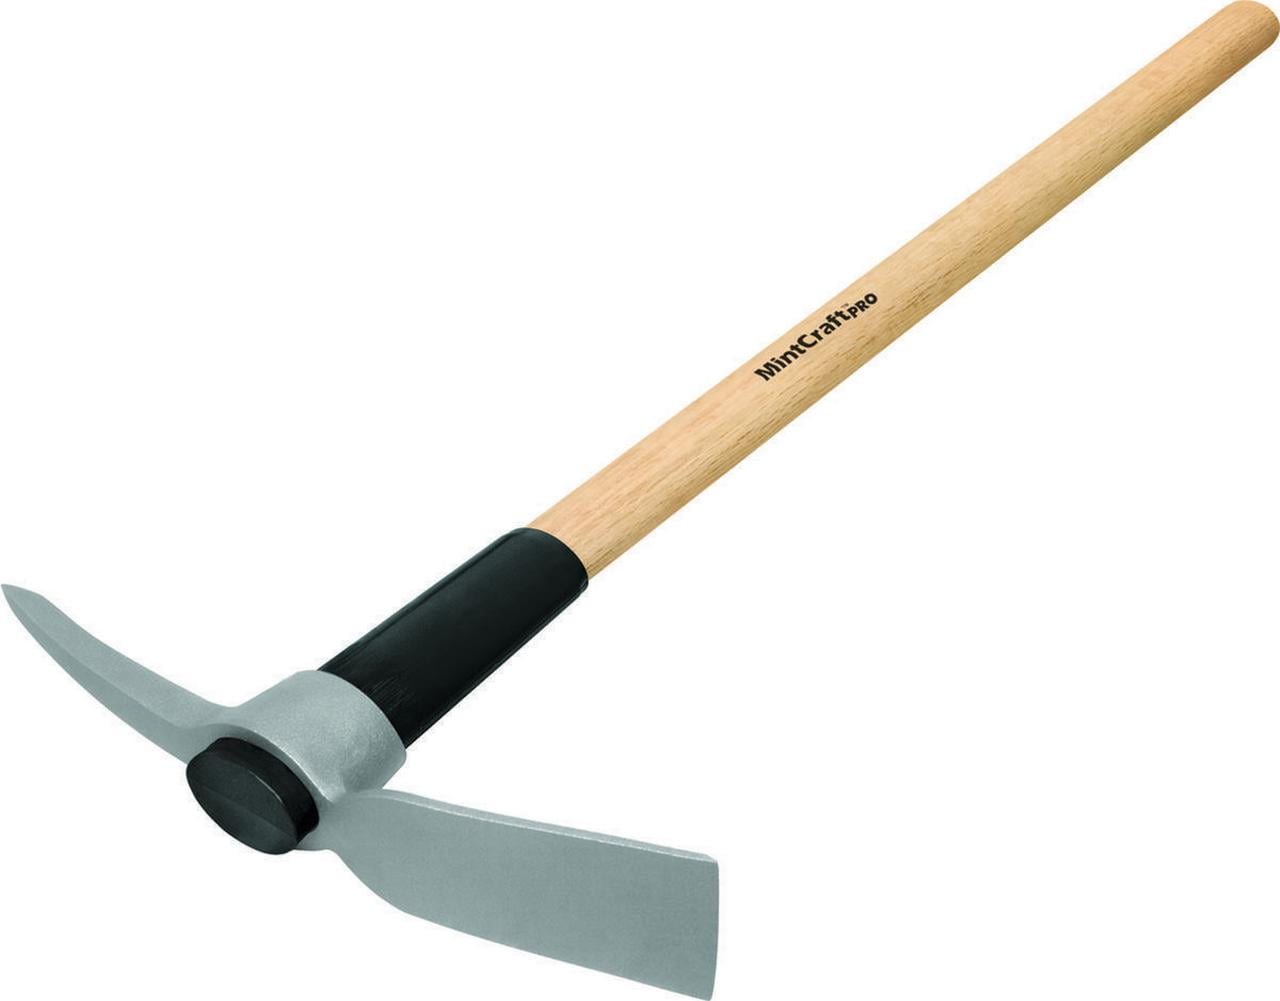 Vulcan Pro Professional Pick Mattock, 12.91 In Forged 2.5 Lb, 36 In ...